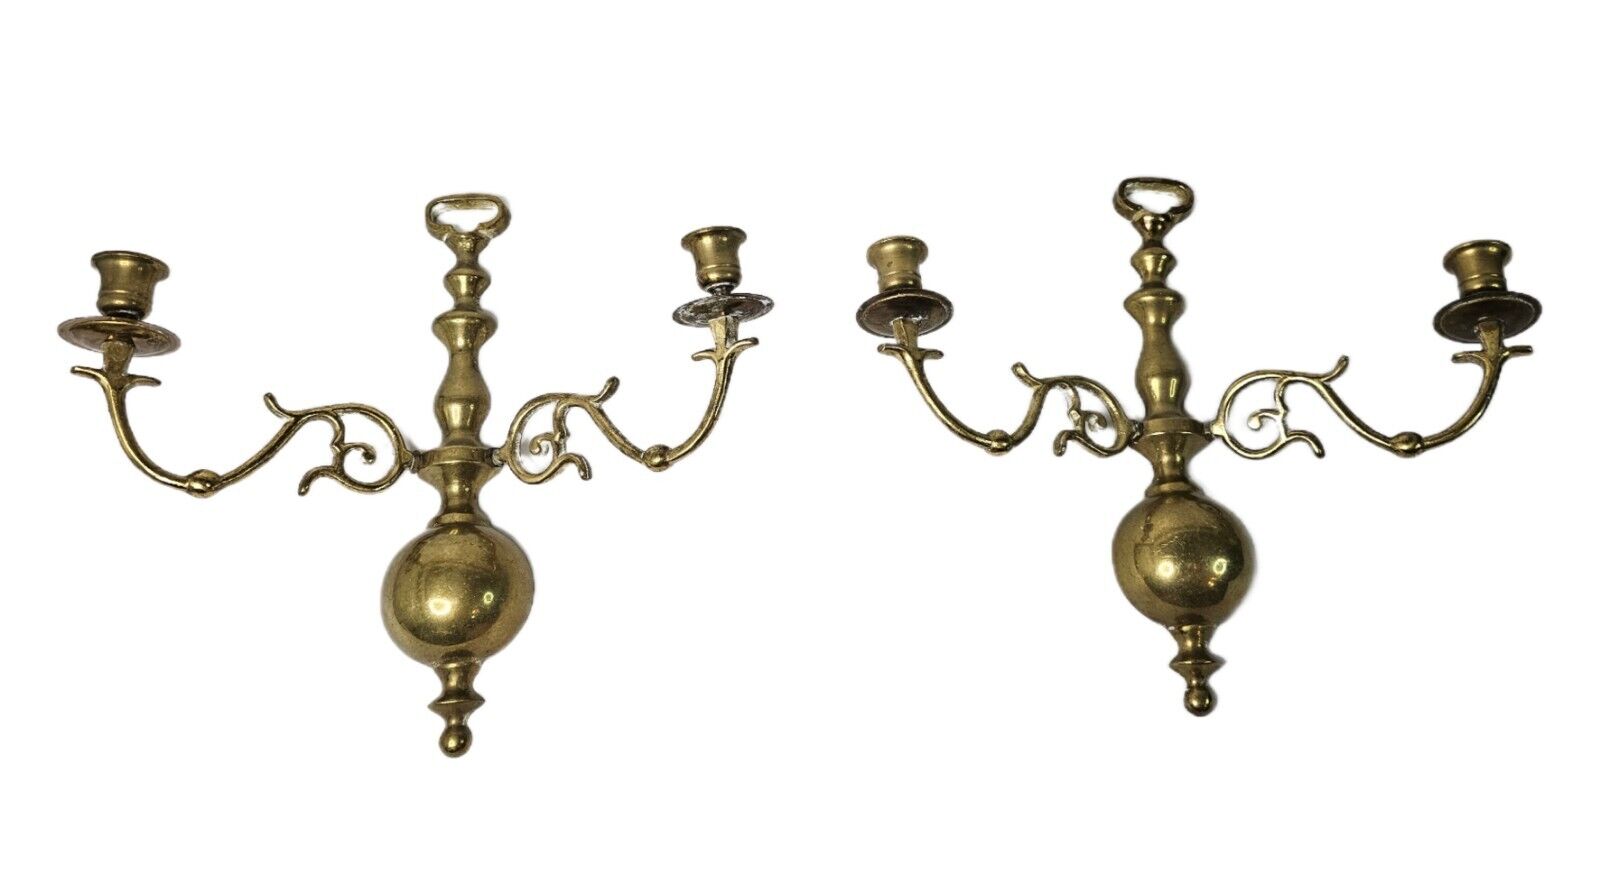 Brass Wall Candle Sconces Williamsburg Colonial Candelabra Candlestick Holder 2